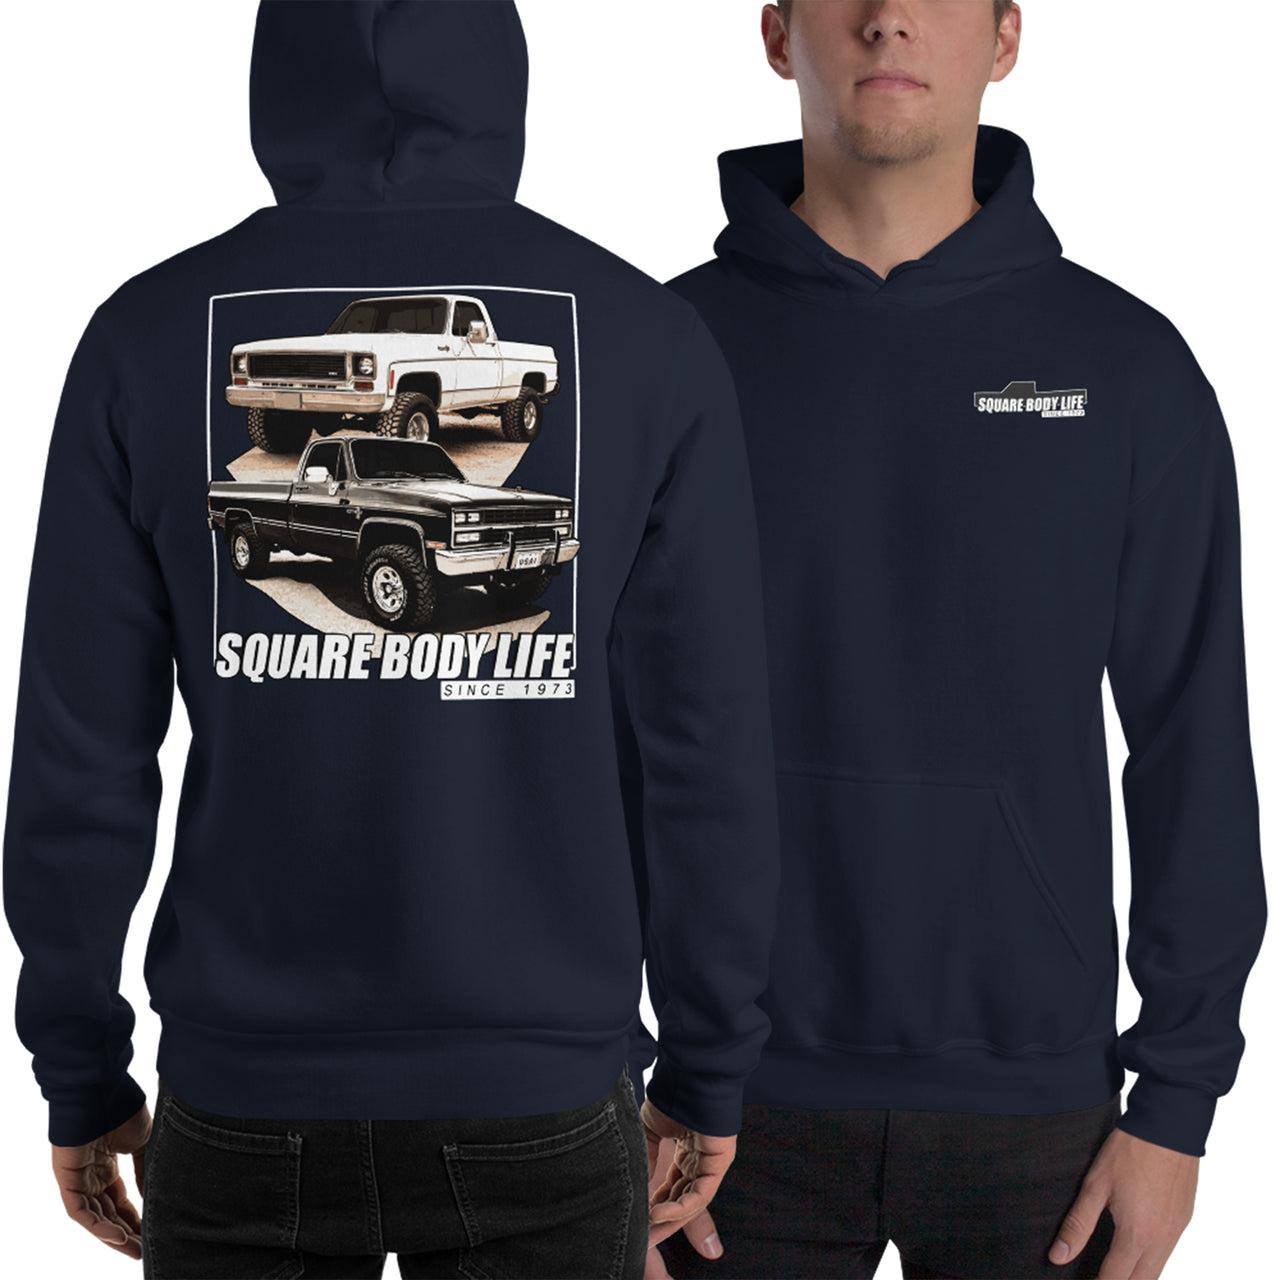 Square Body Life Hoodie modeled in navy